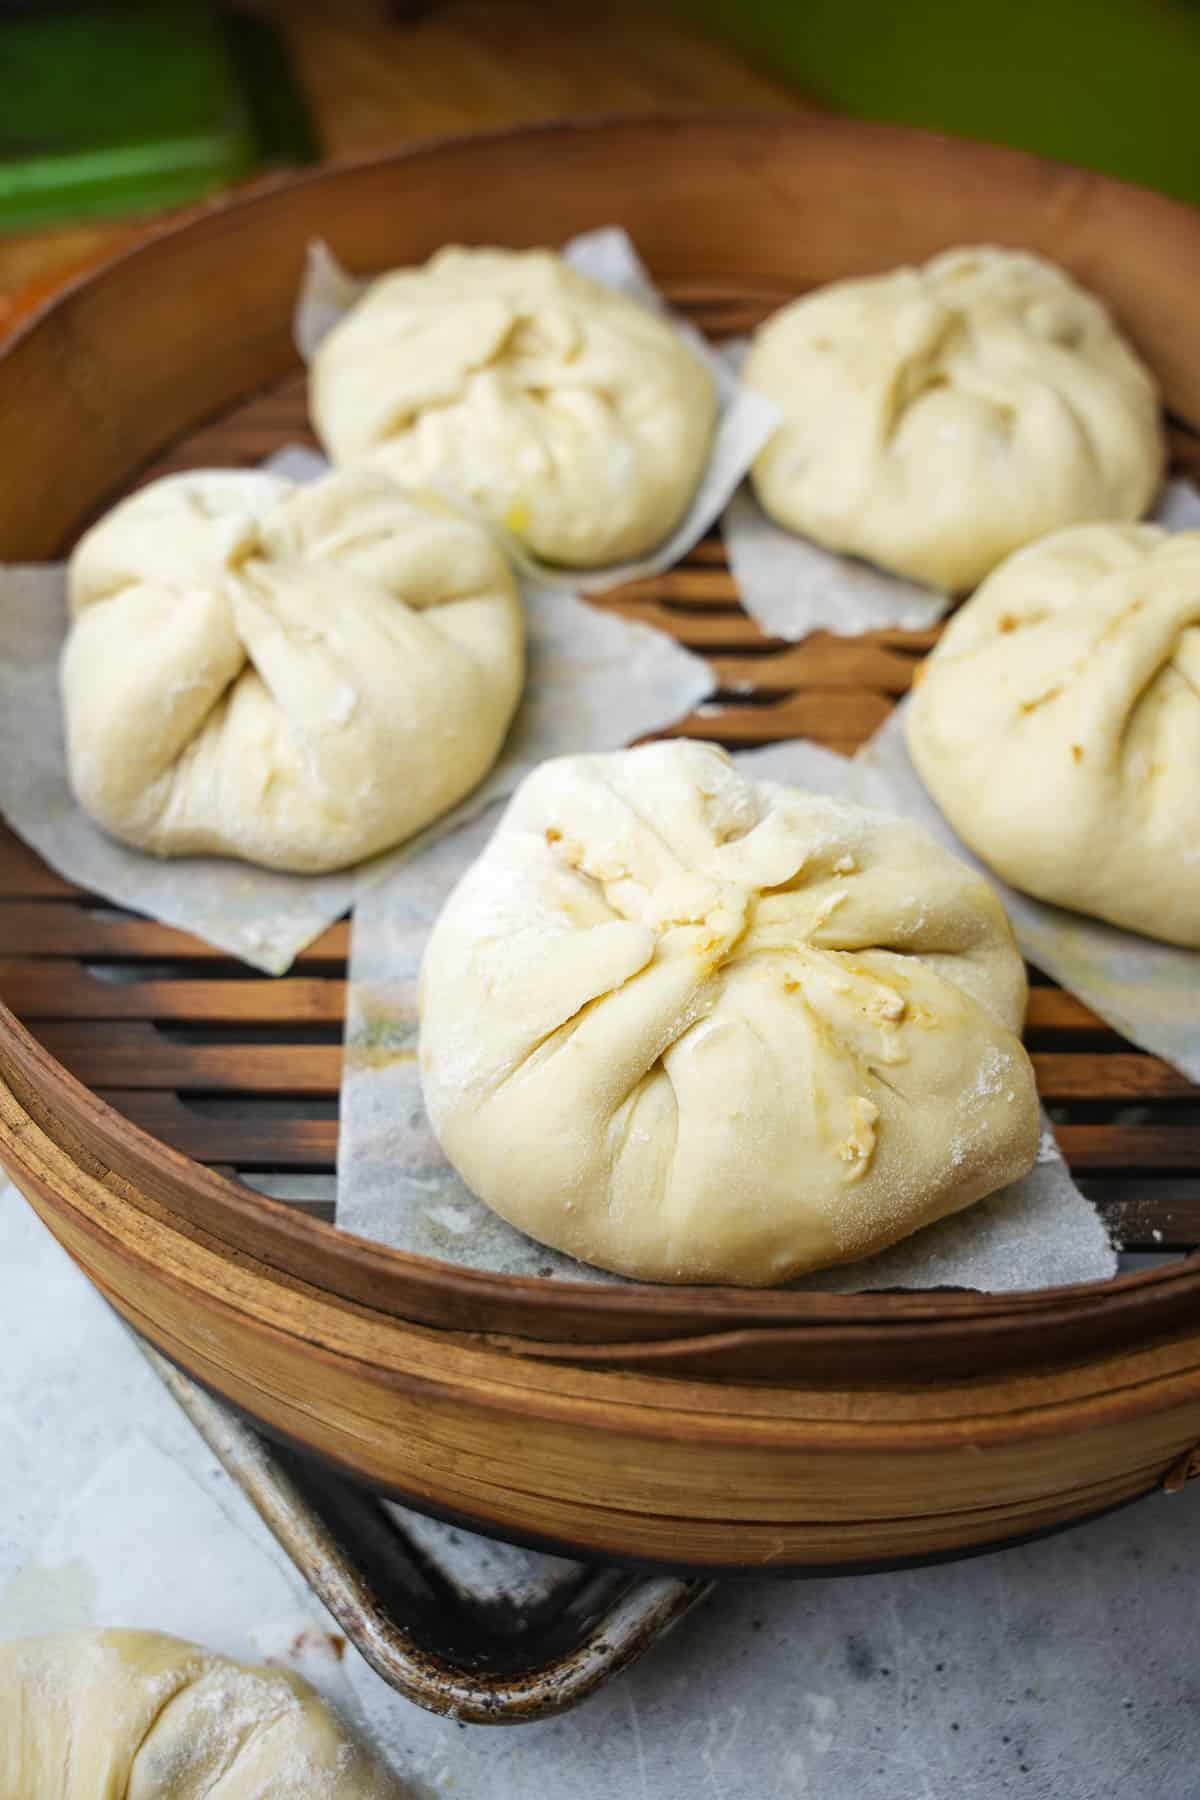 Formed bao in a bamboo steamer.